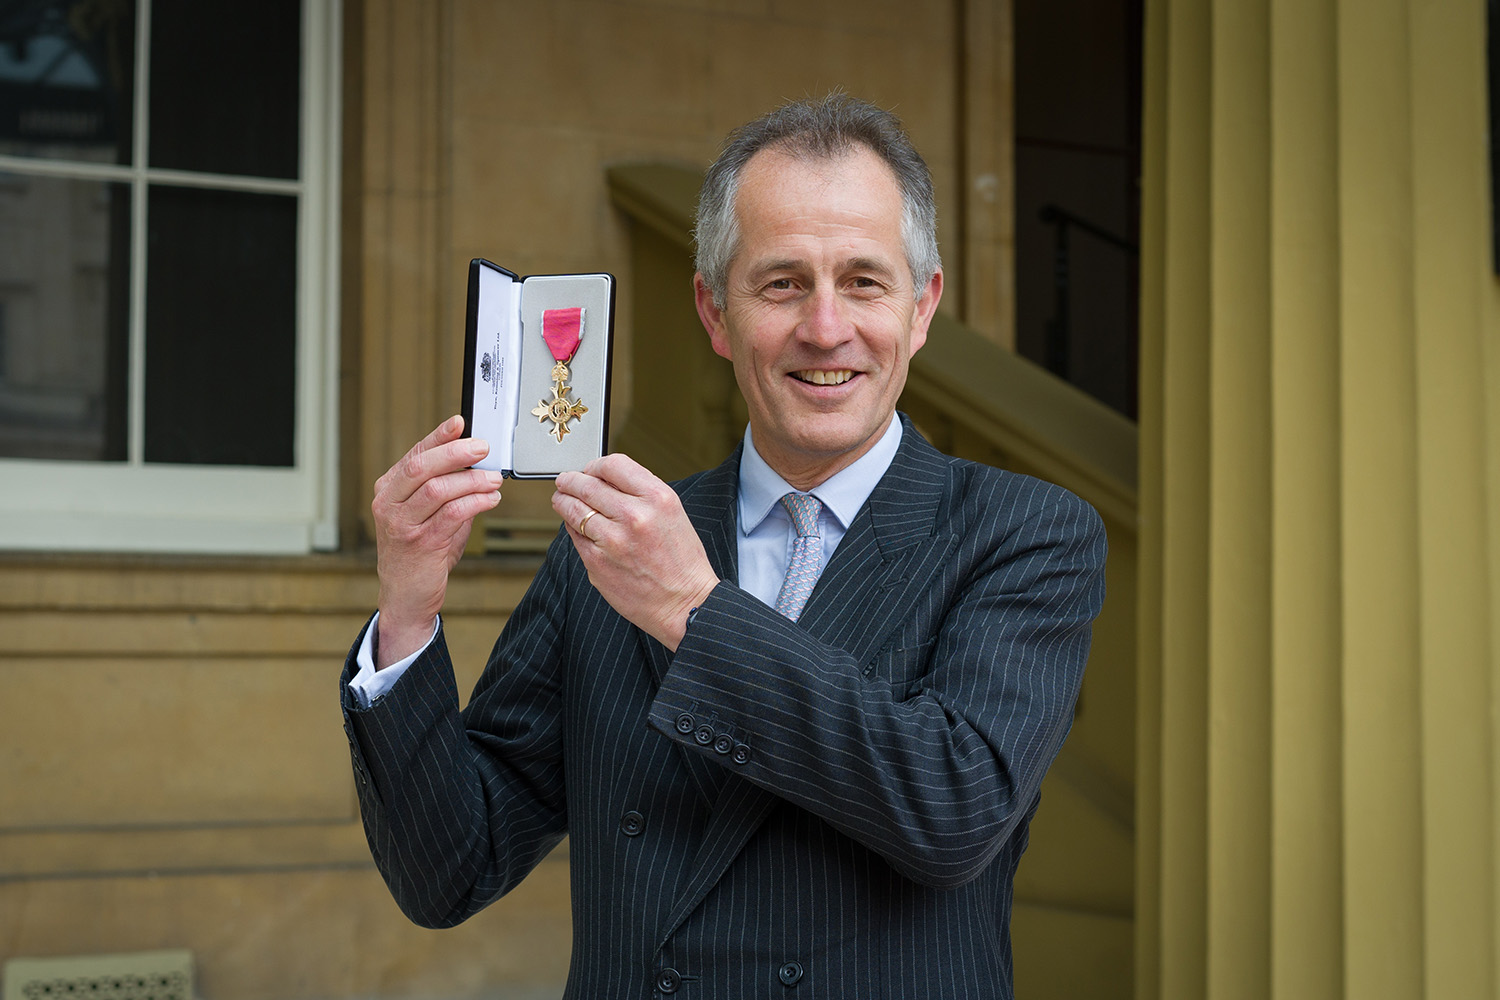 Chief Executive Roly Owers honoured with OBE for services to equine welfare